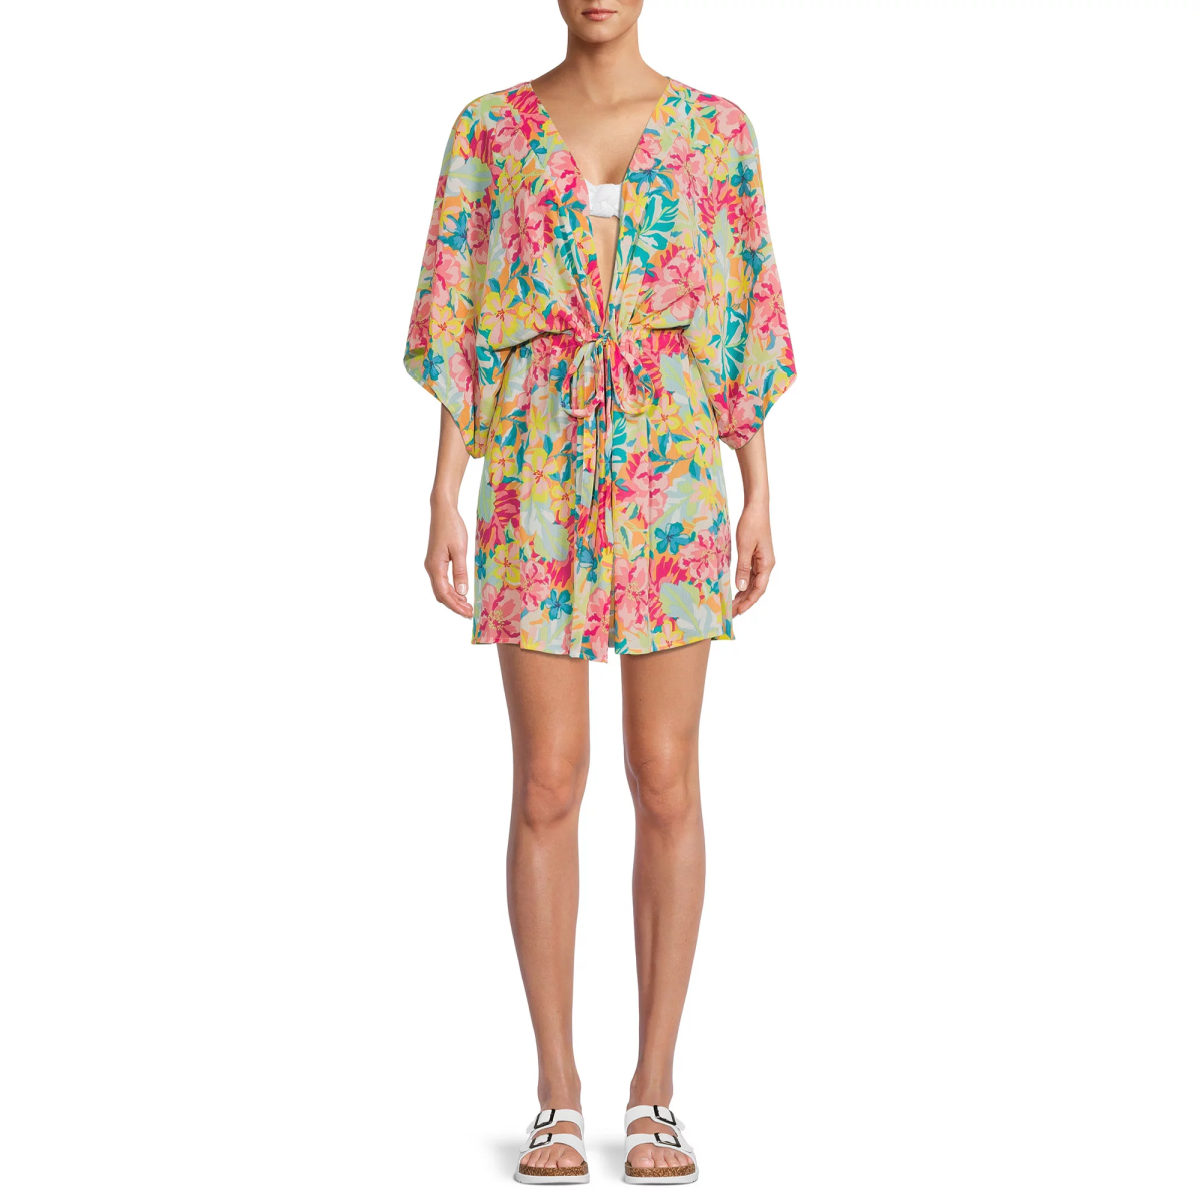 Floral Time and Tru cover up from Walmart's swimsuit cover up collection